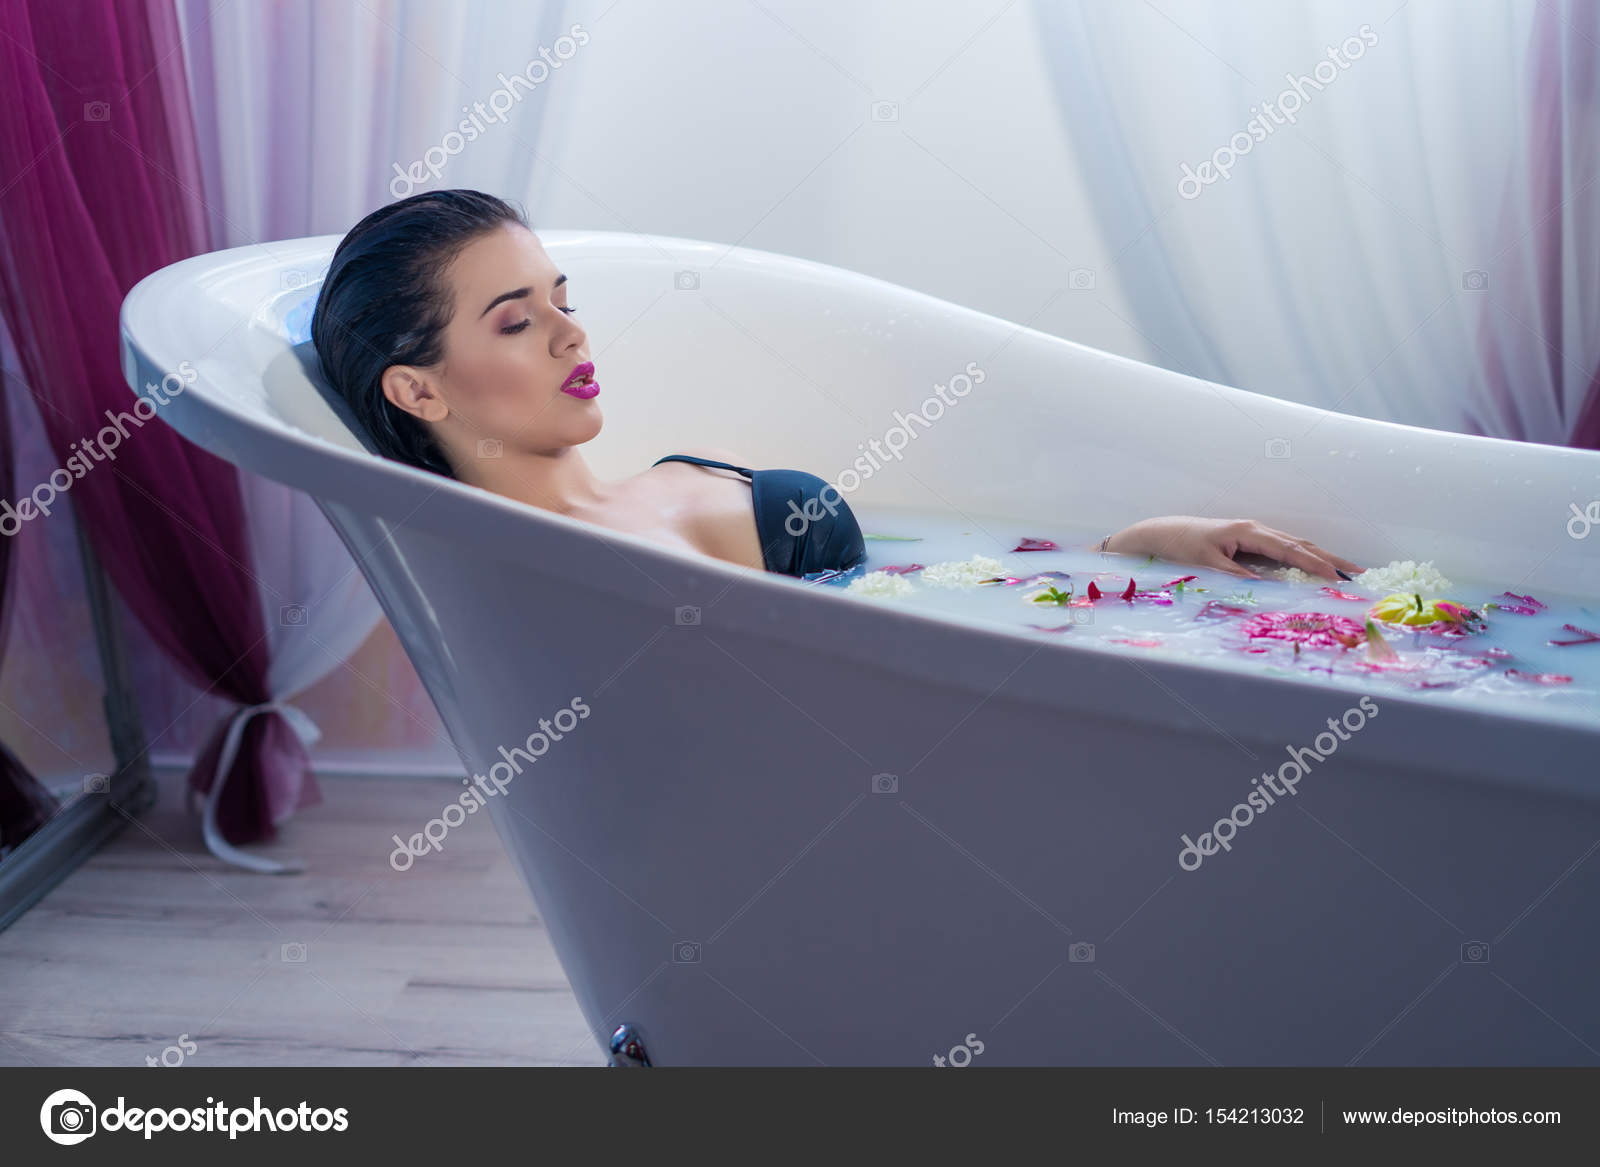 Sexy brunette woman relaxing in a hot bath with flowers Stock Photo by ©igor.kardasov.gmail 154213032 pic